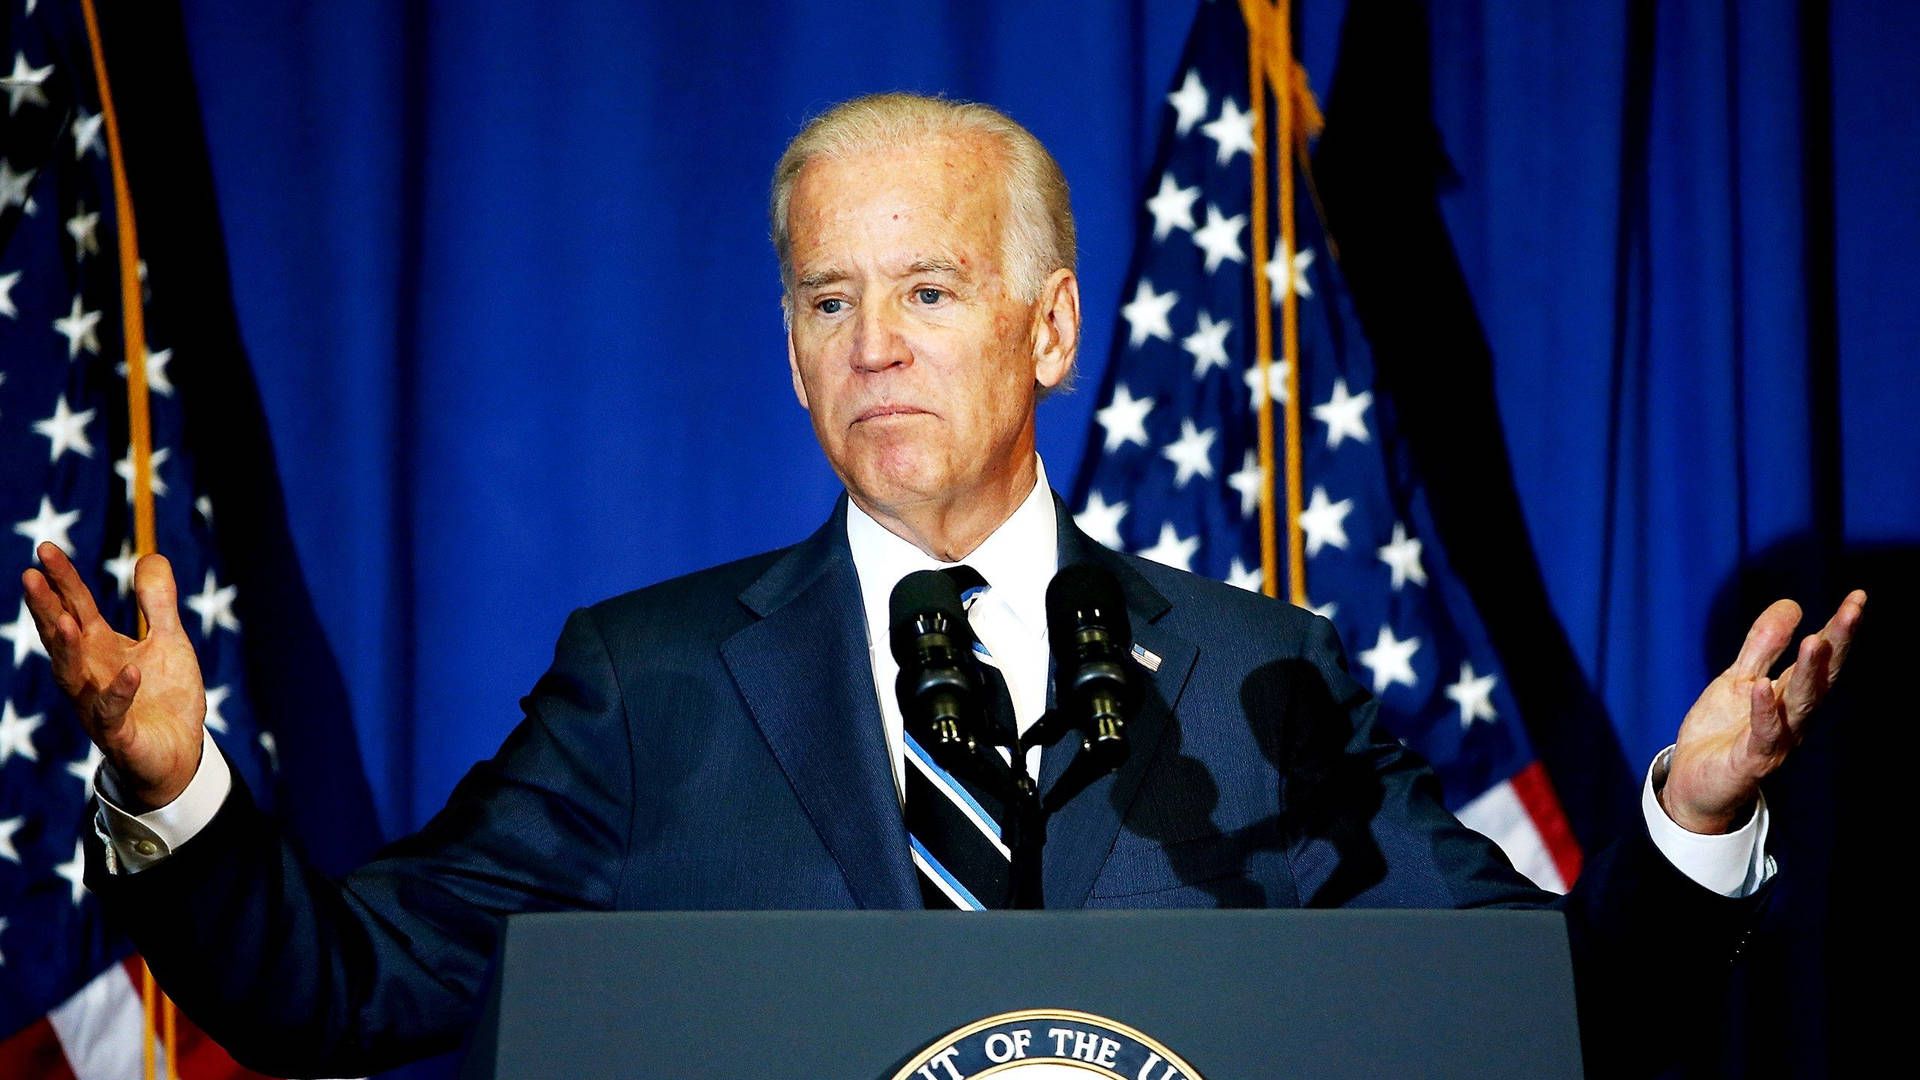 Joe Biden Makes A Strong Statement Supporting Women's Rights Background